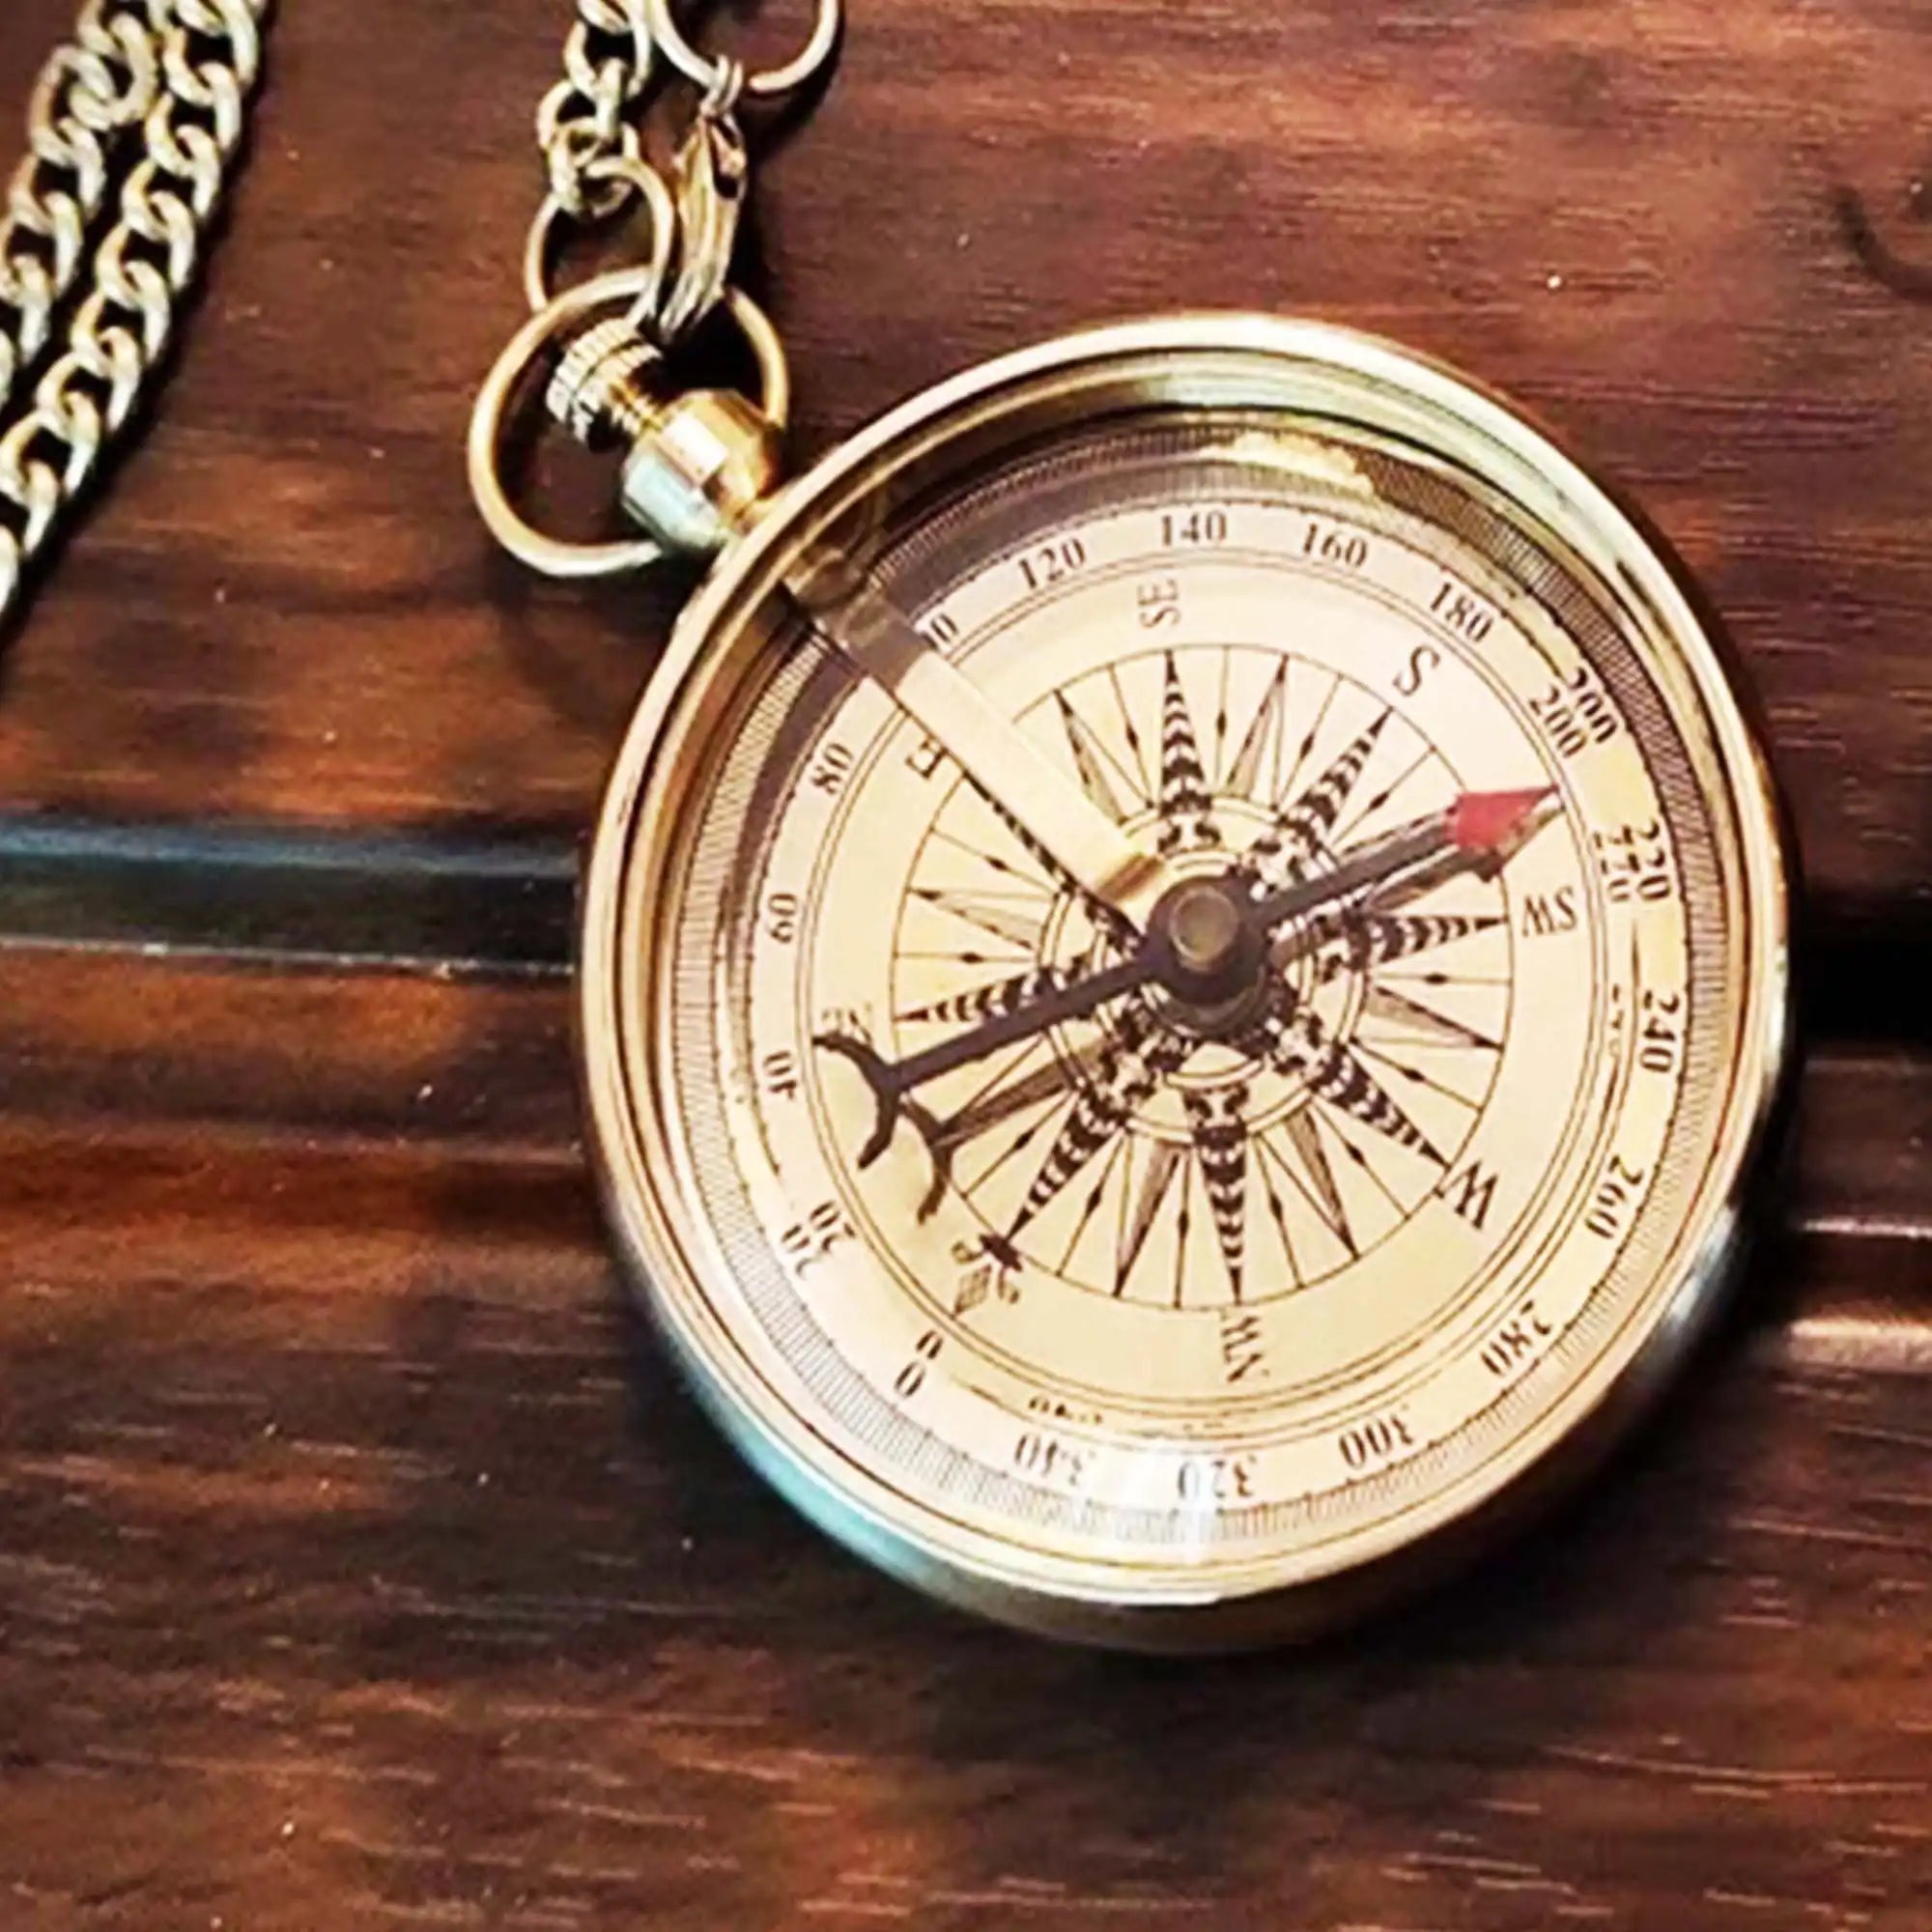 Brass Compass, Personalized Compass, Pocket Compass, Wedding Gift, Engraved Compass,Religious Gift, Groomsmen Gift, Labor Day Gift, Baptism